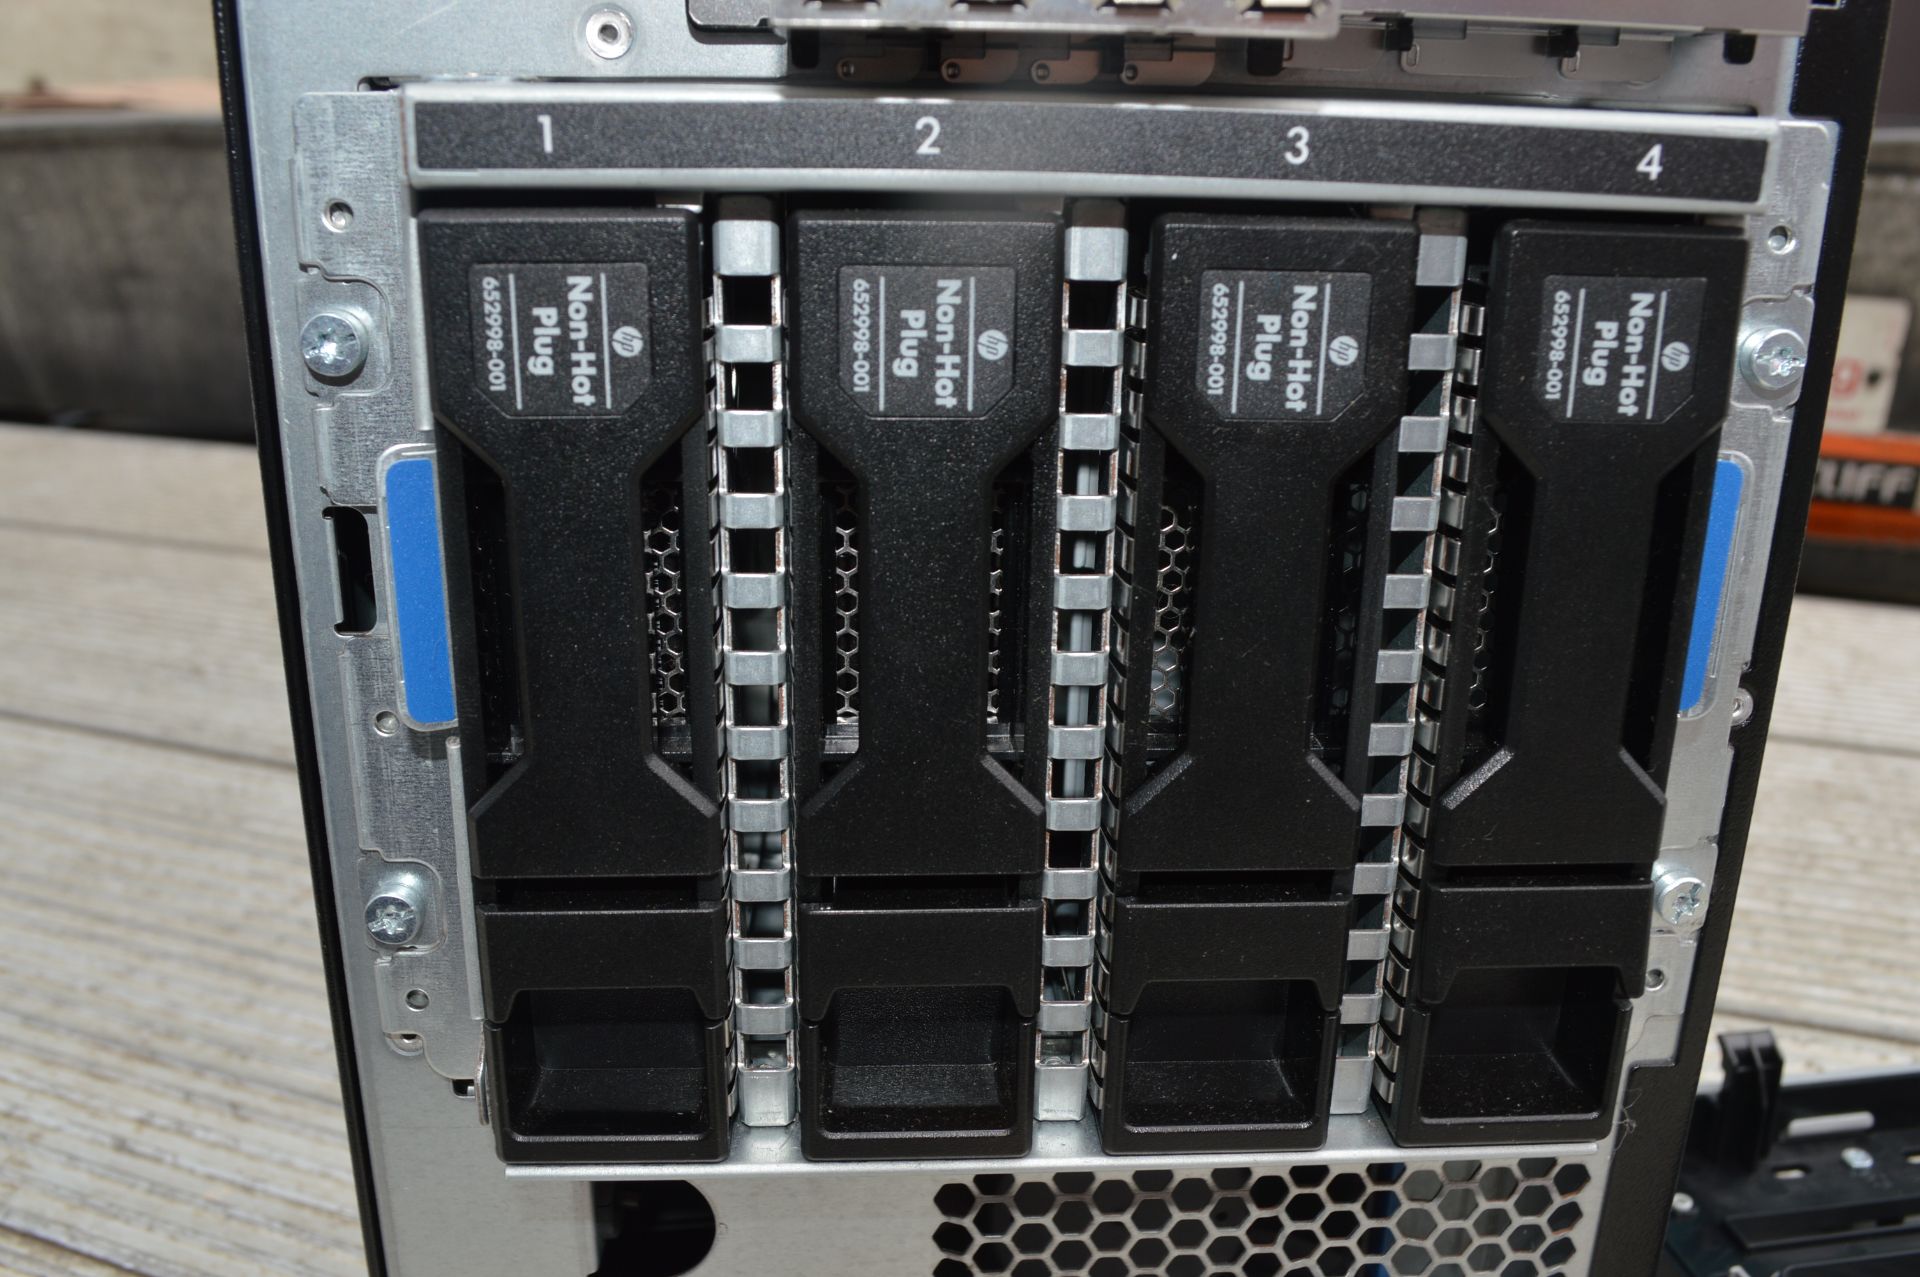 HP Proliant ML310EGEN8 Intel Xeon Towerserver V2 with 2: HP 7200RPM ITB SATA Drives (please note: - Image 6 of 7